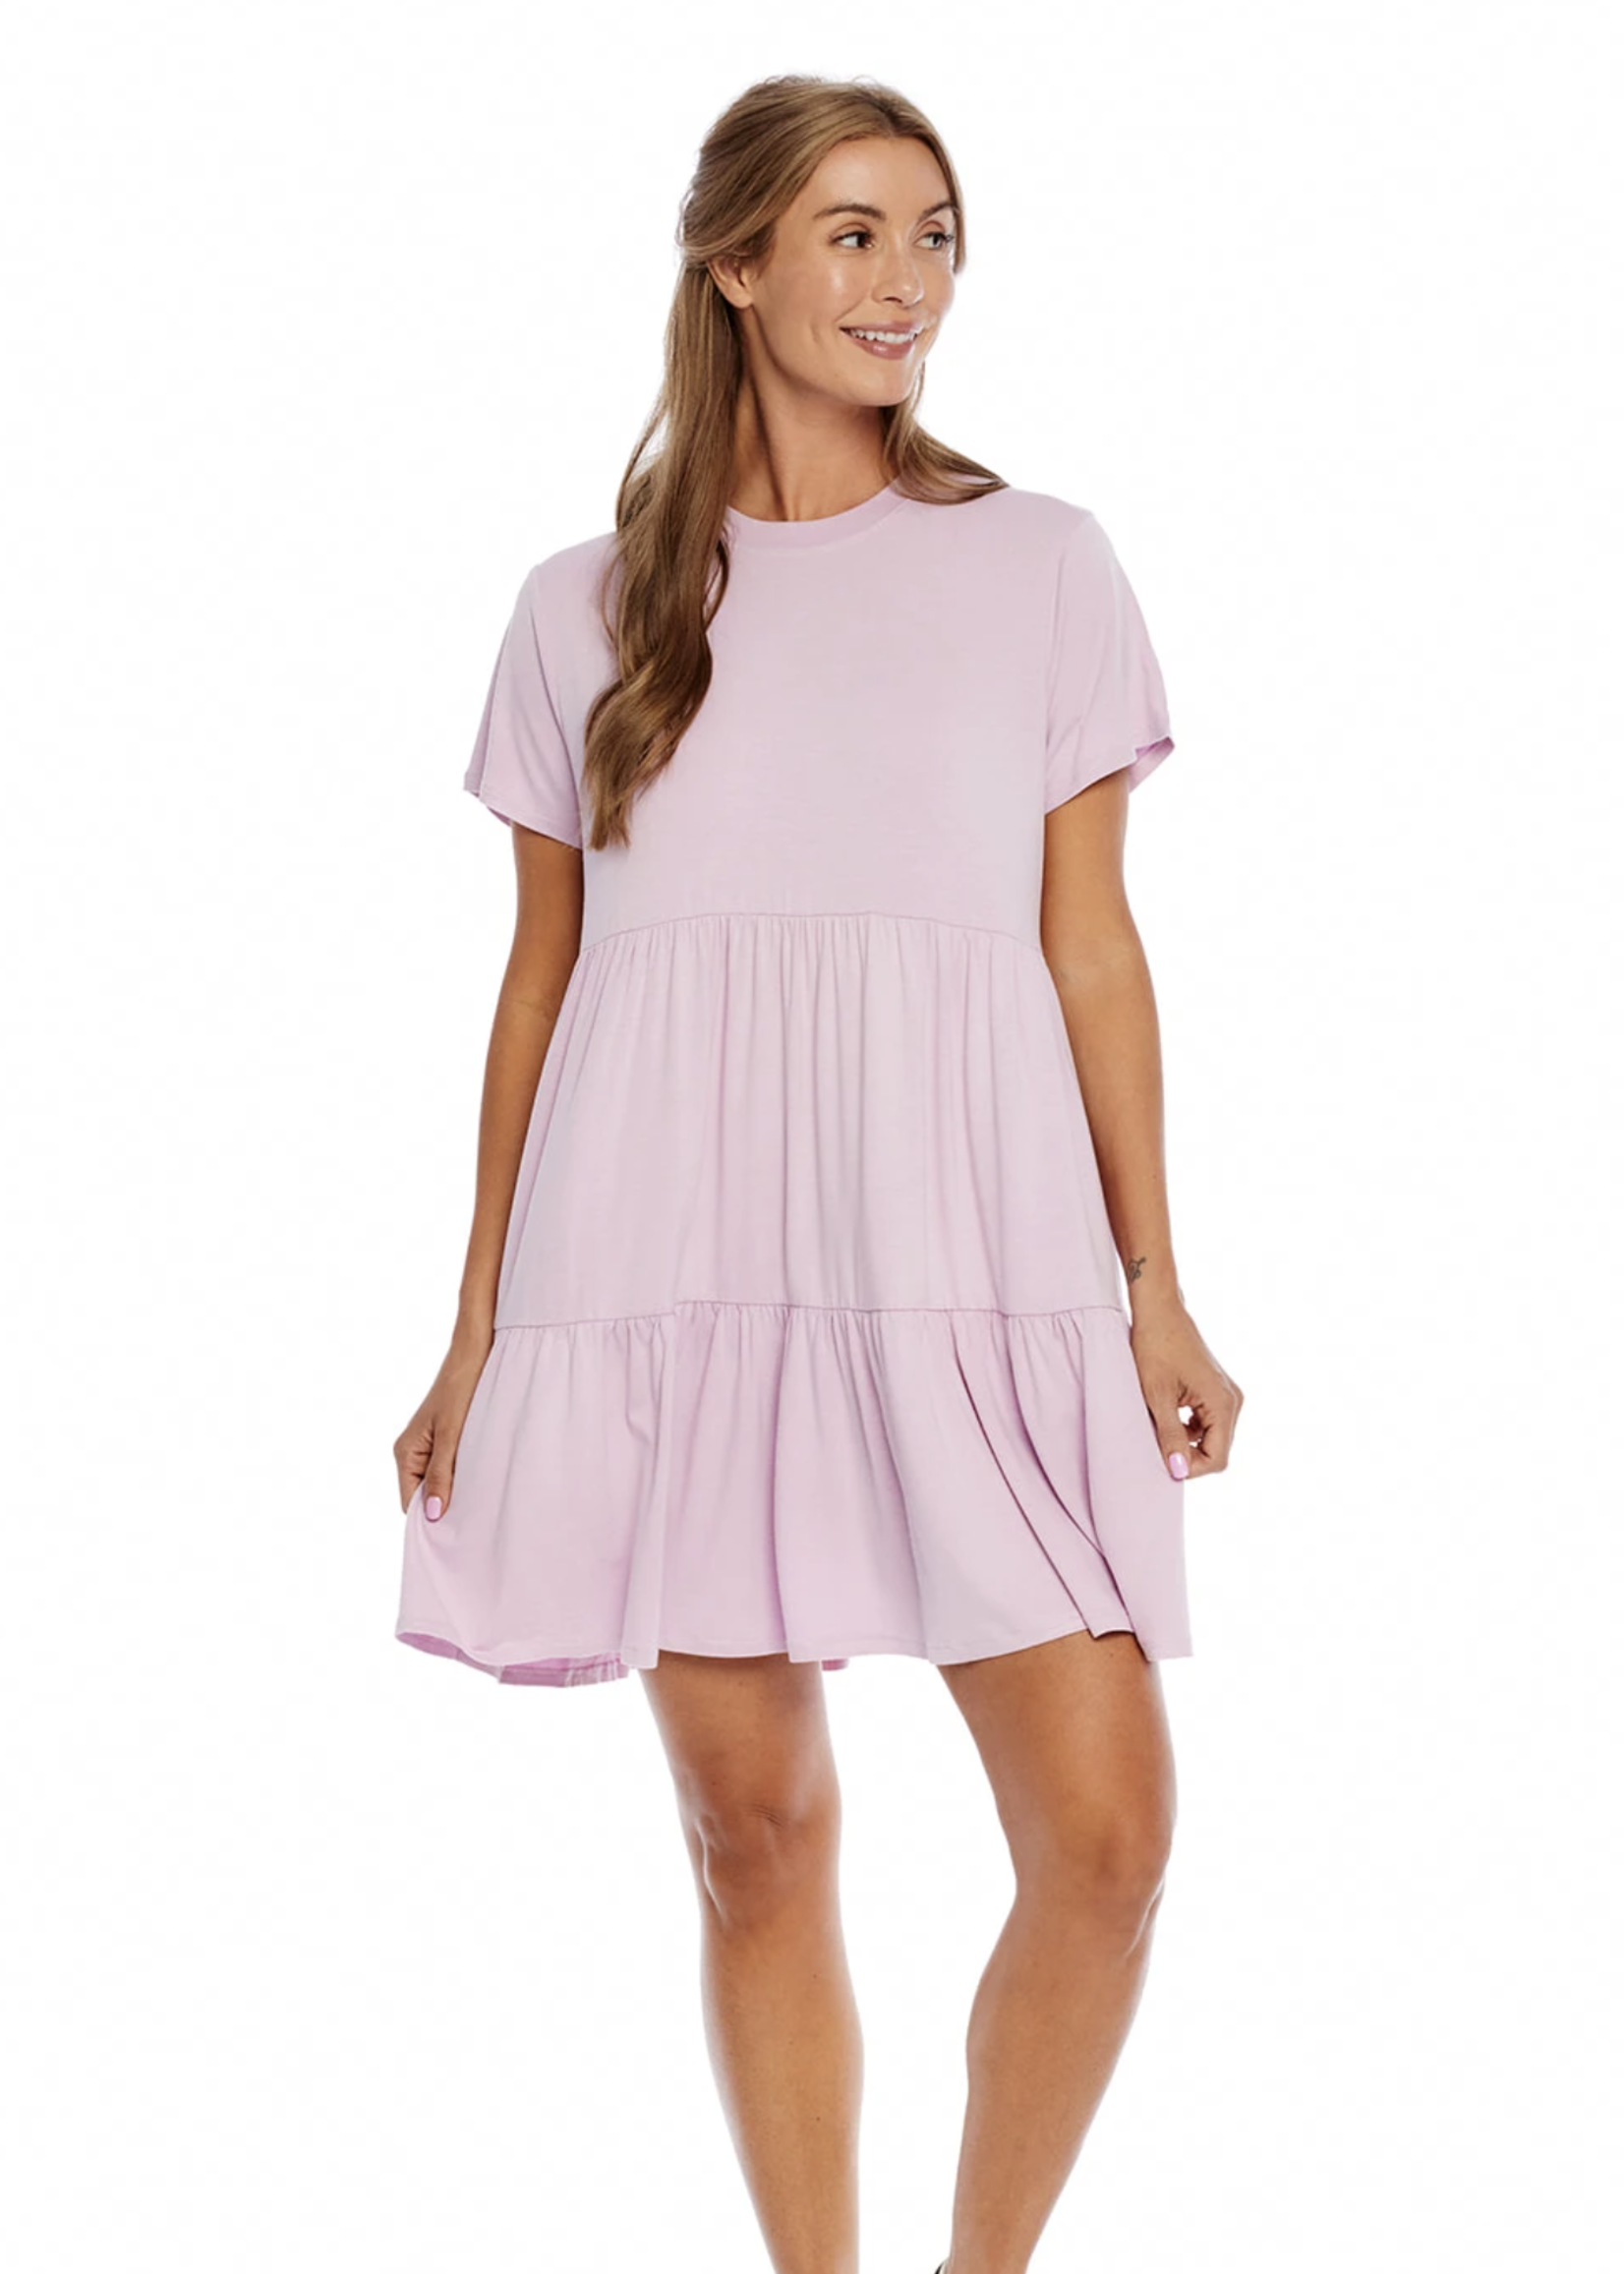 Elitaire Boutique Poncey Dress in Lilac